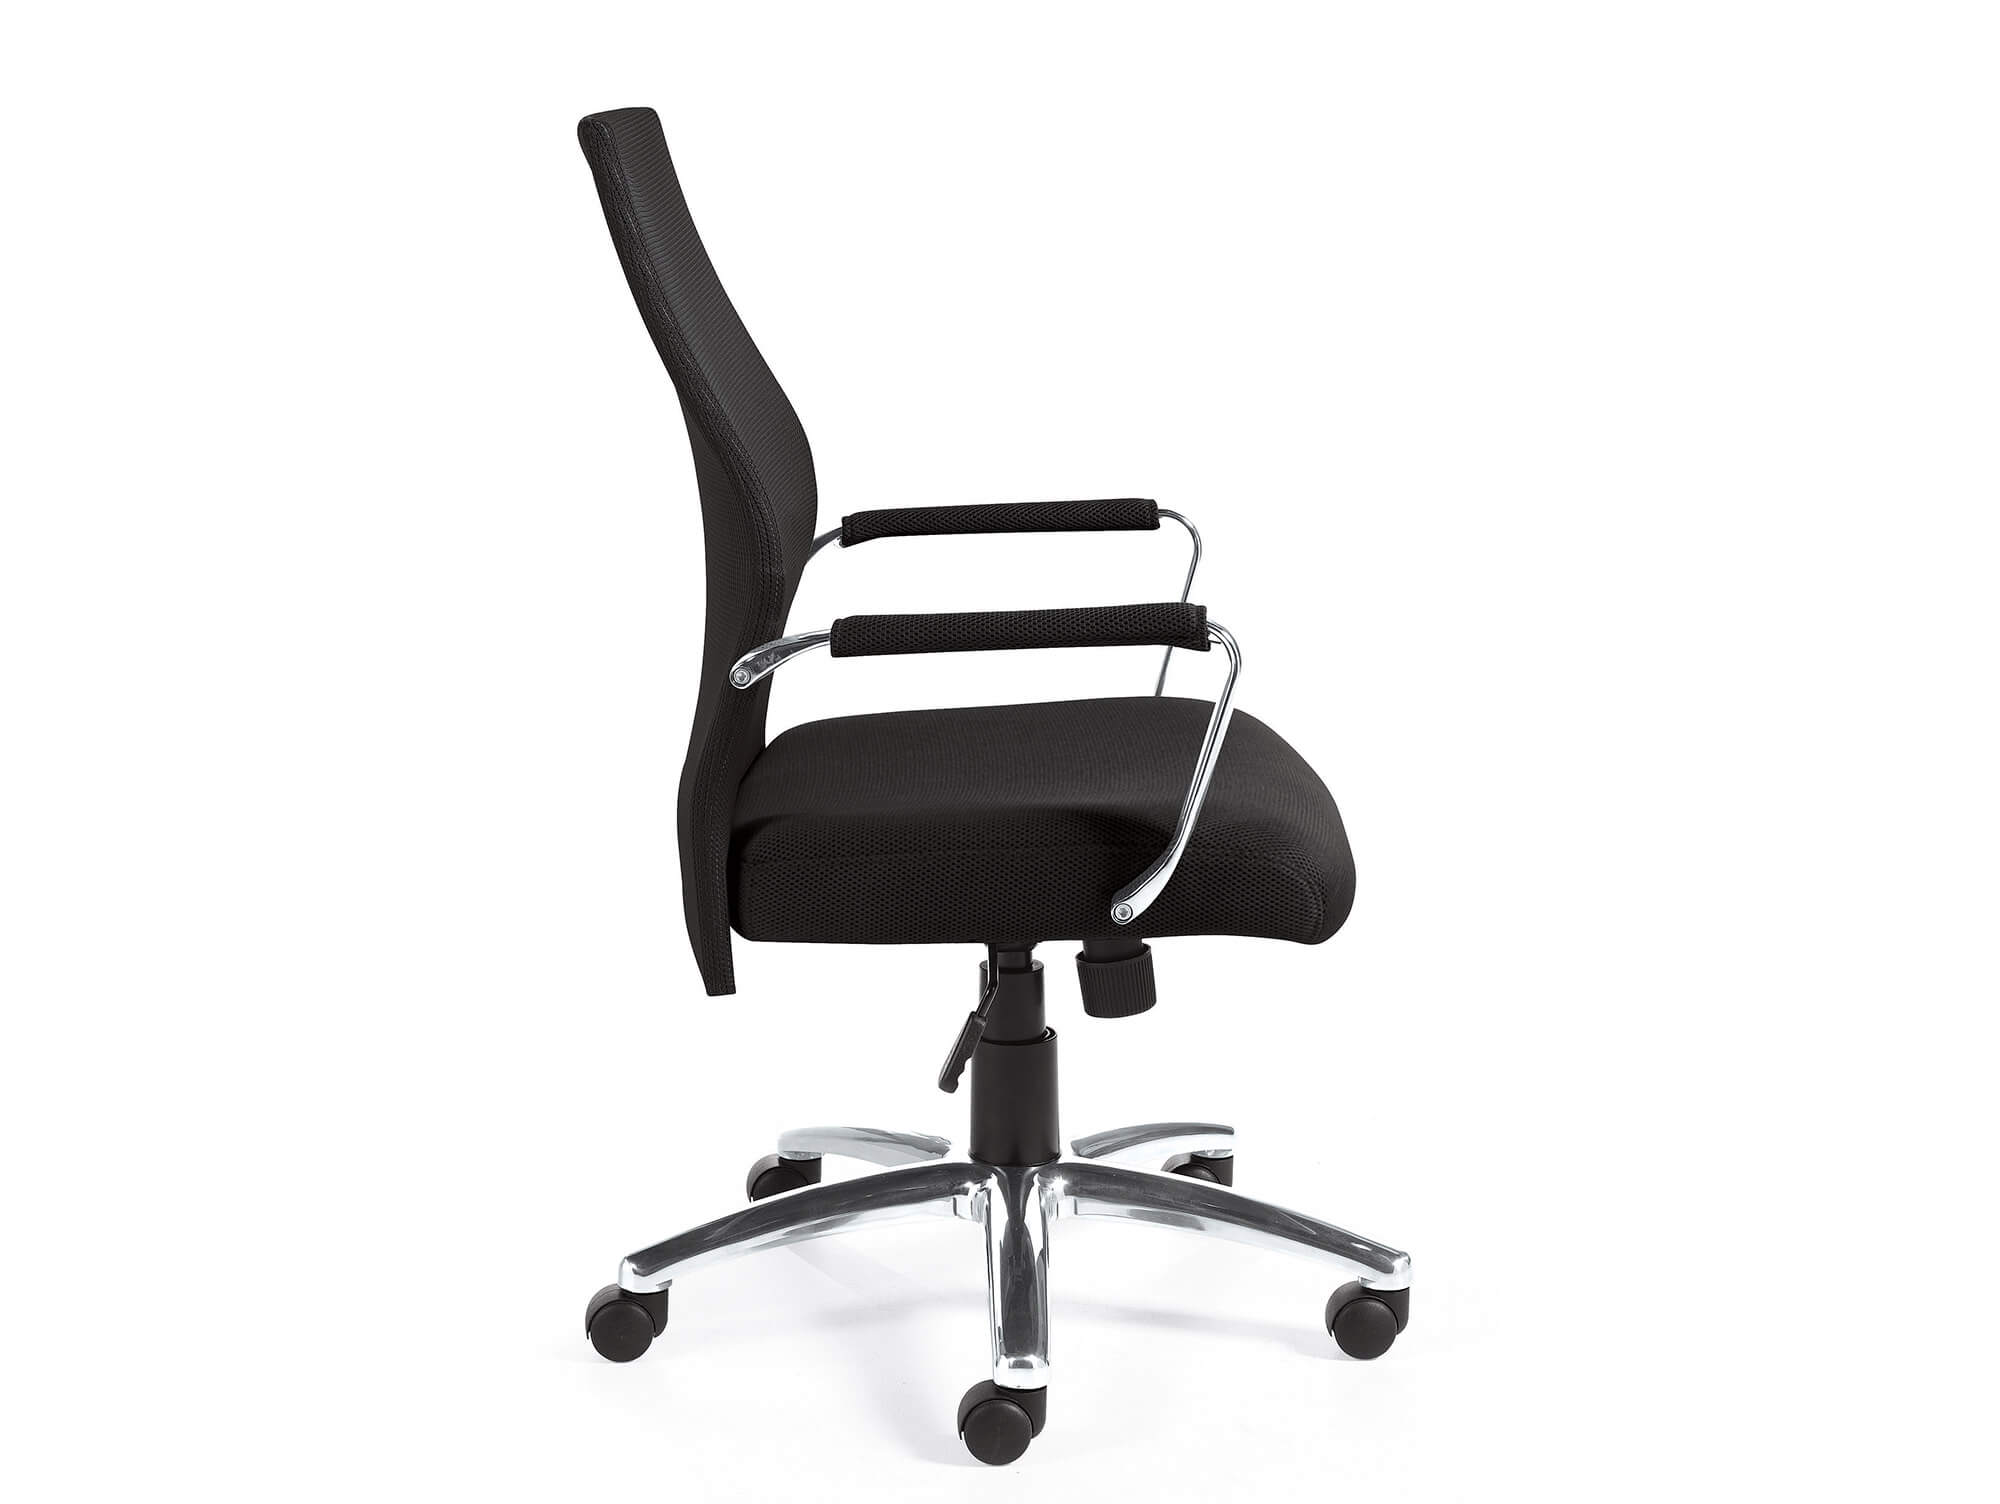 Conference style seating CUB 11657B GTO